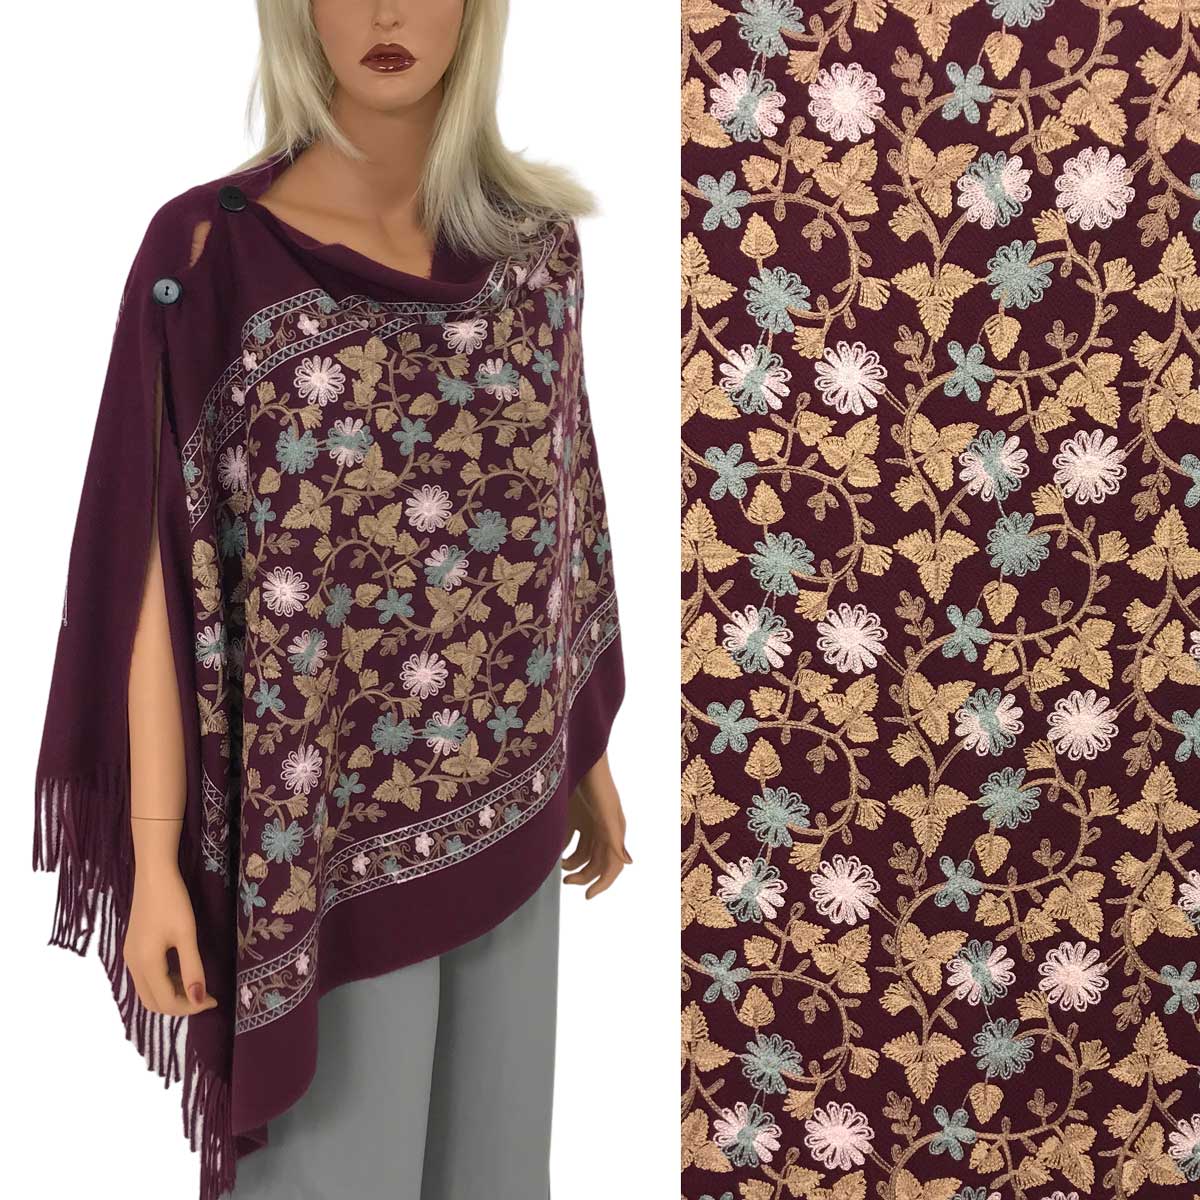 3218 - Embroidered Cashmere Feel Button Poncho/Sha